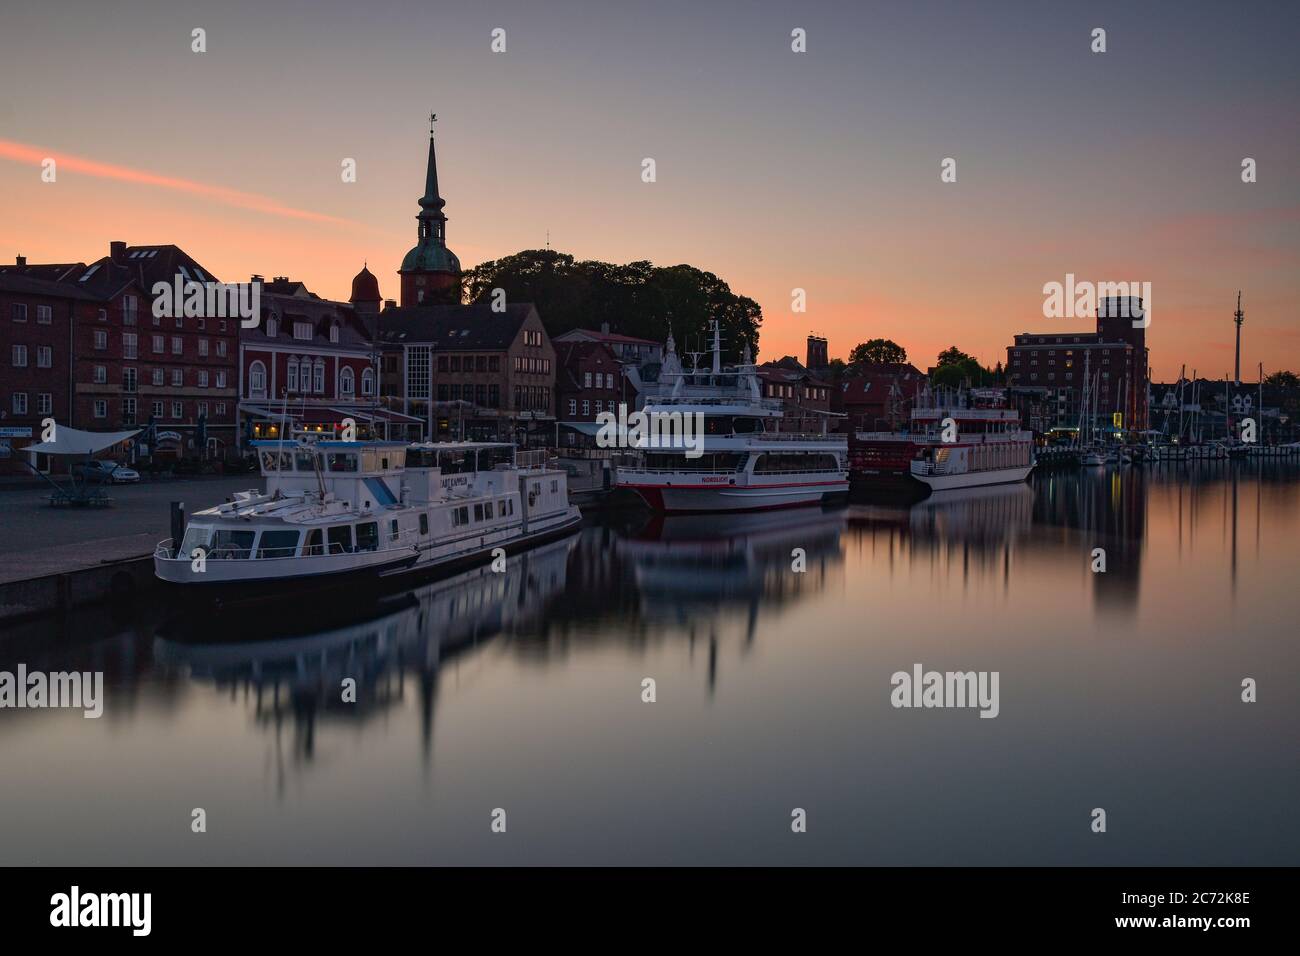 Evening scene at the fishing town of Kappeln an der Schlei in Germany Stock Photo